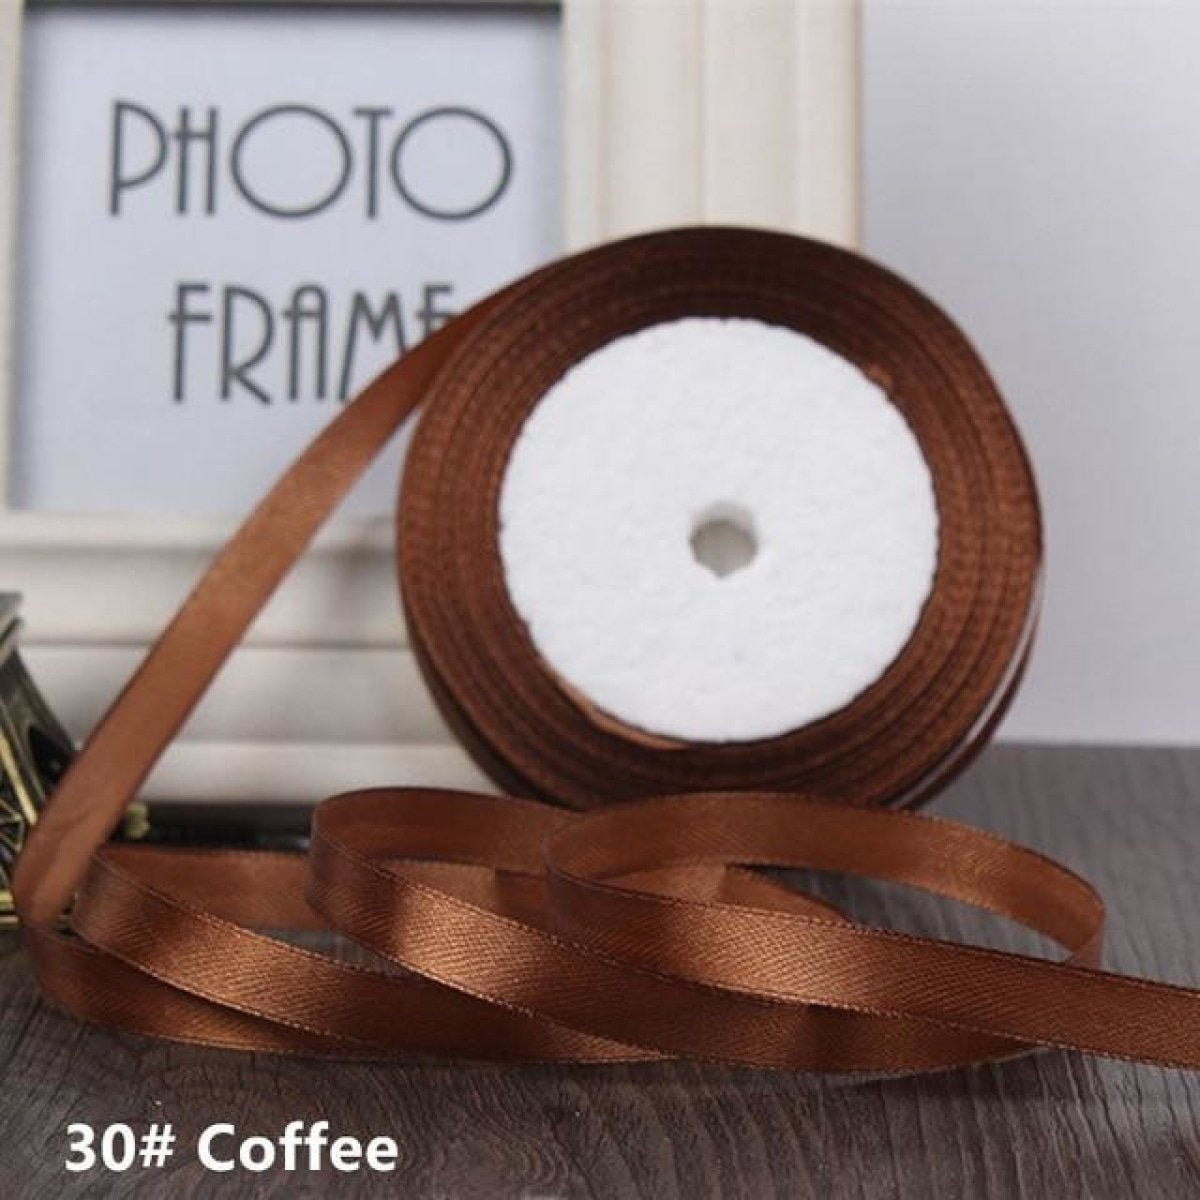 22m 10mm-15mm Polyester Ribbon for Crafts Bow Gift Wrapping Party Wedding Hair - Coffee 15mm - - Asia Sell